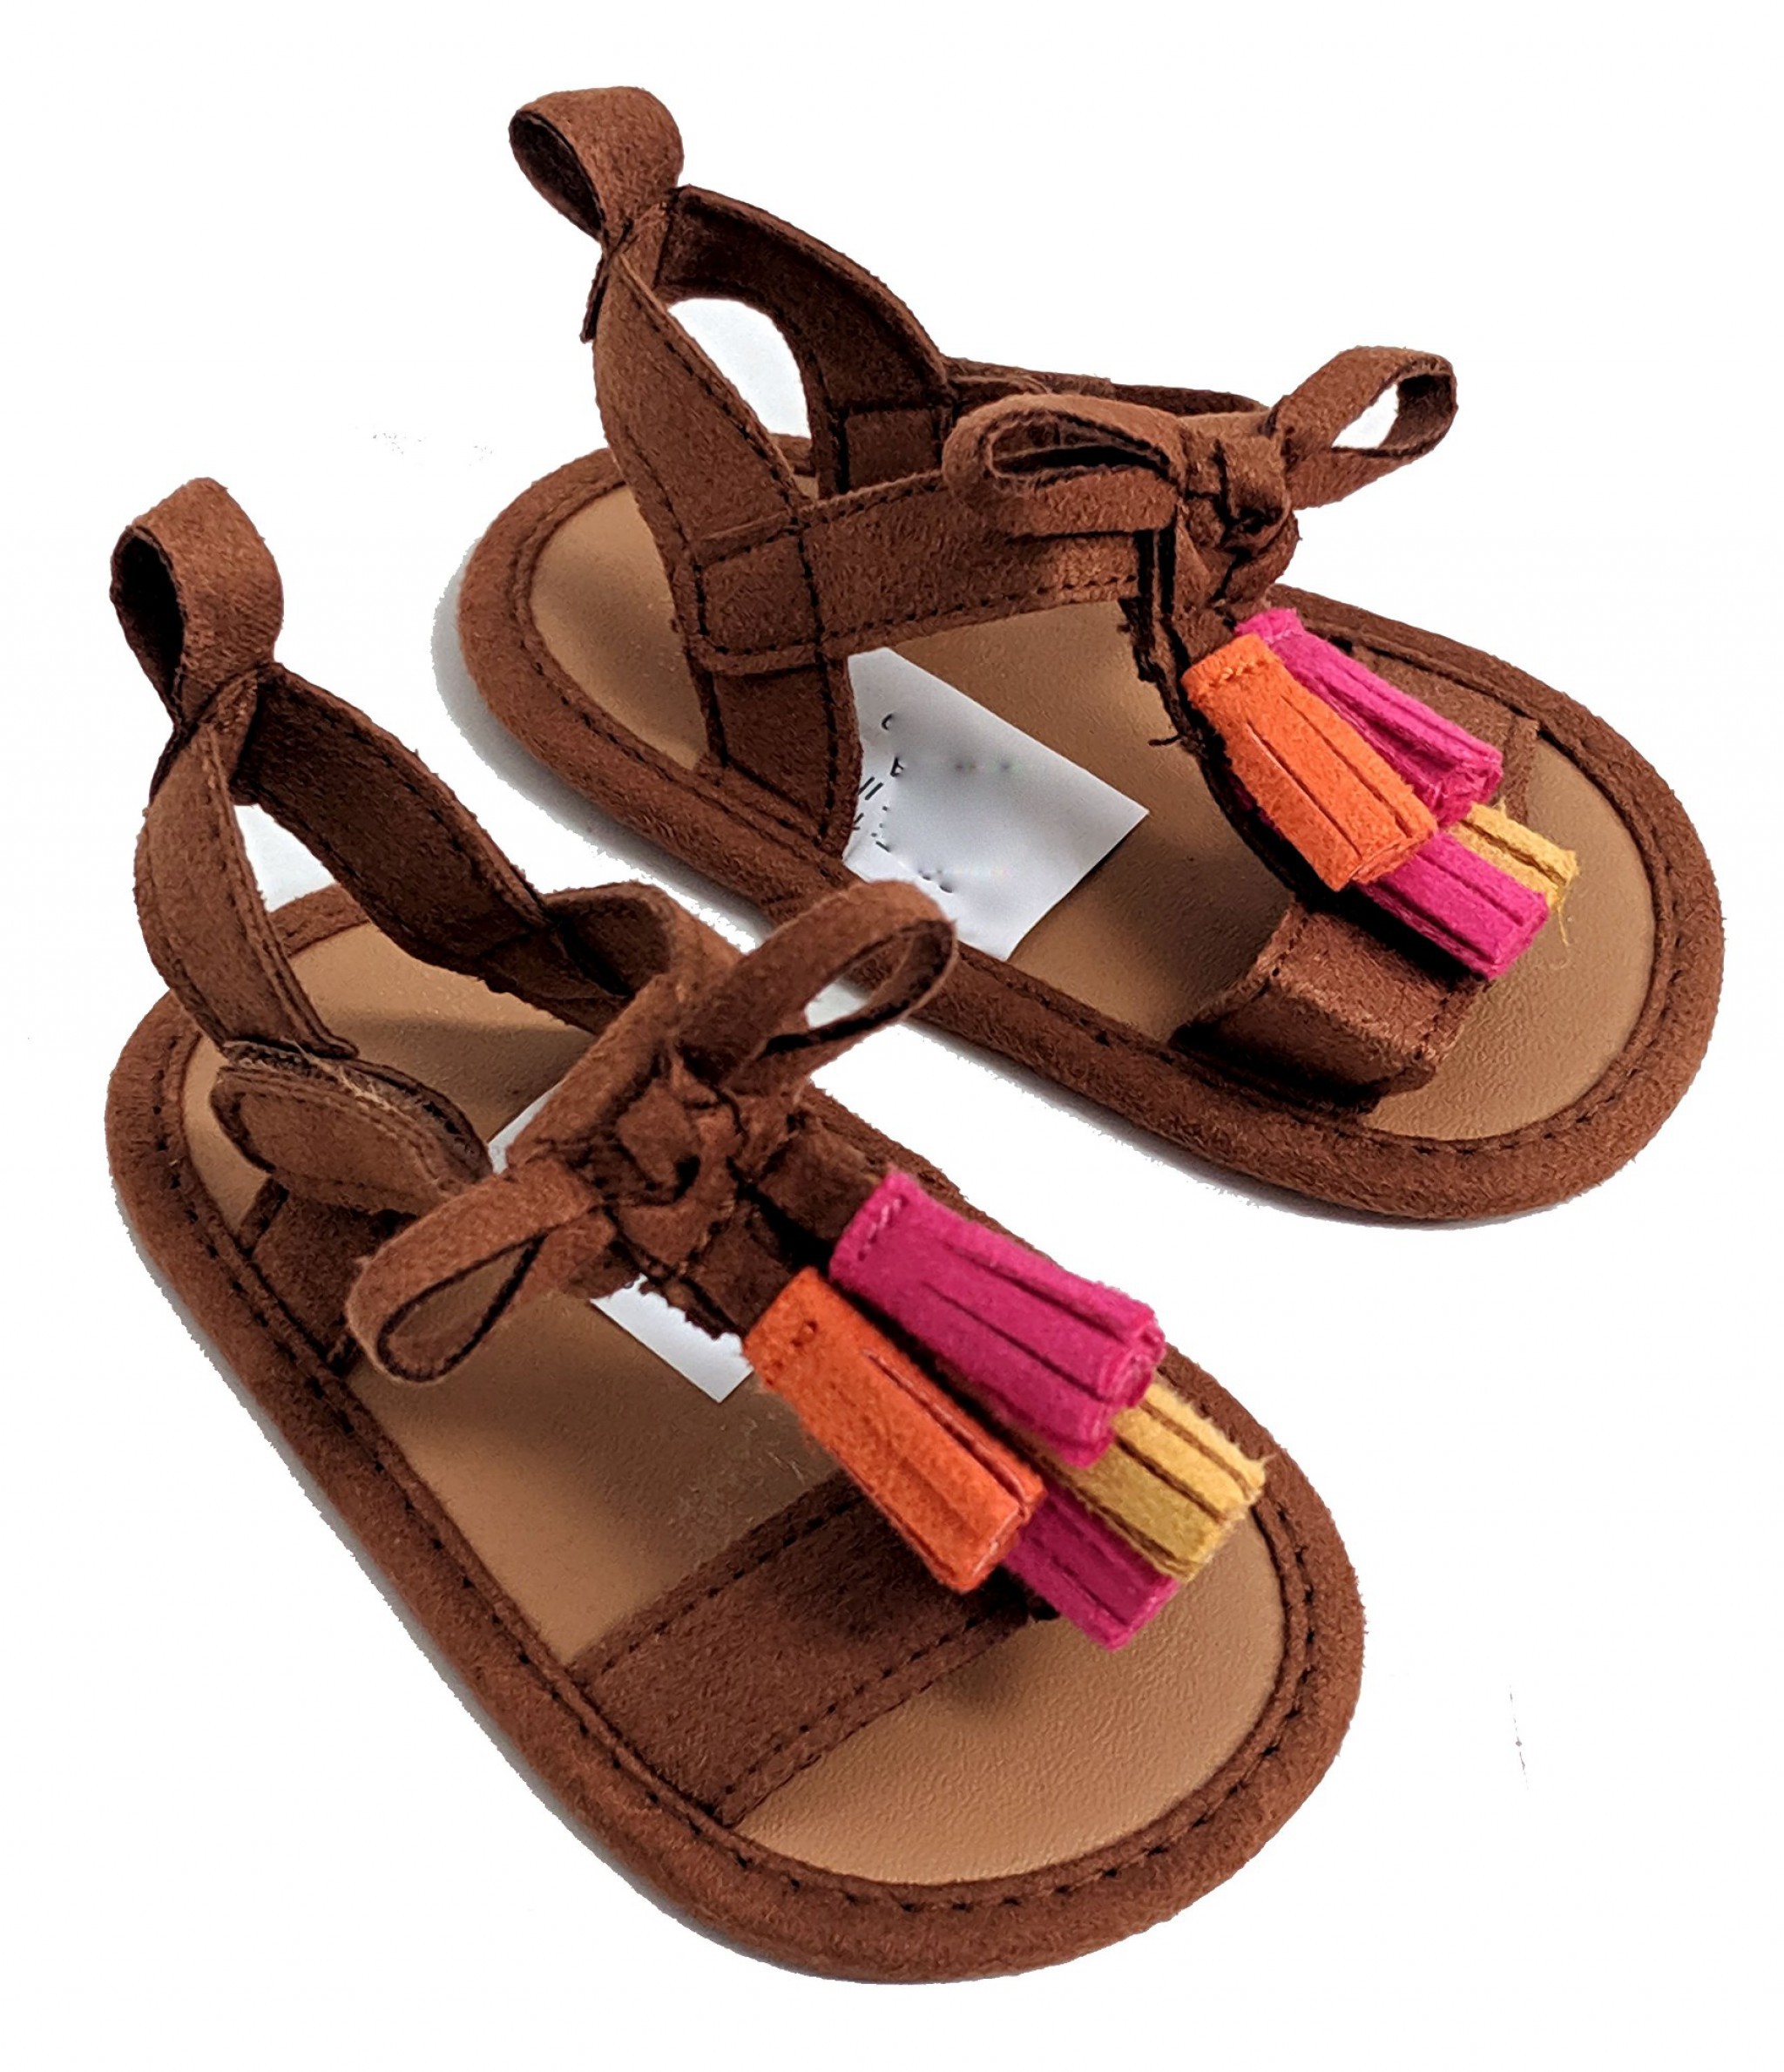 sandals with bows on them